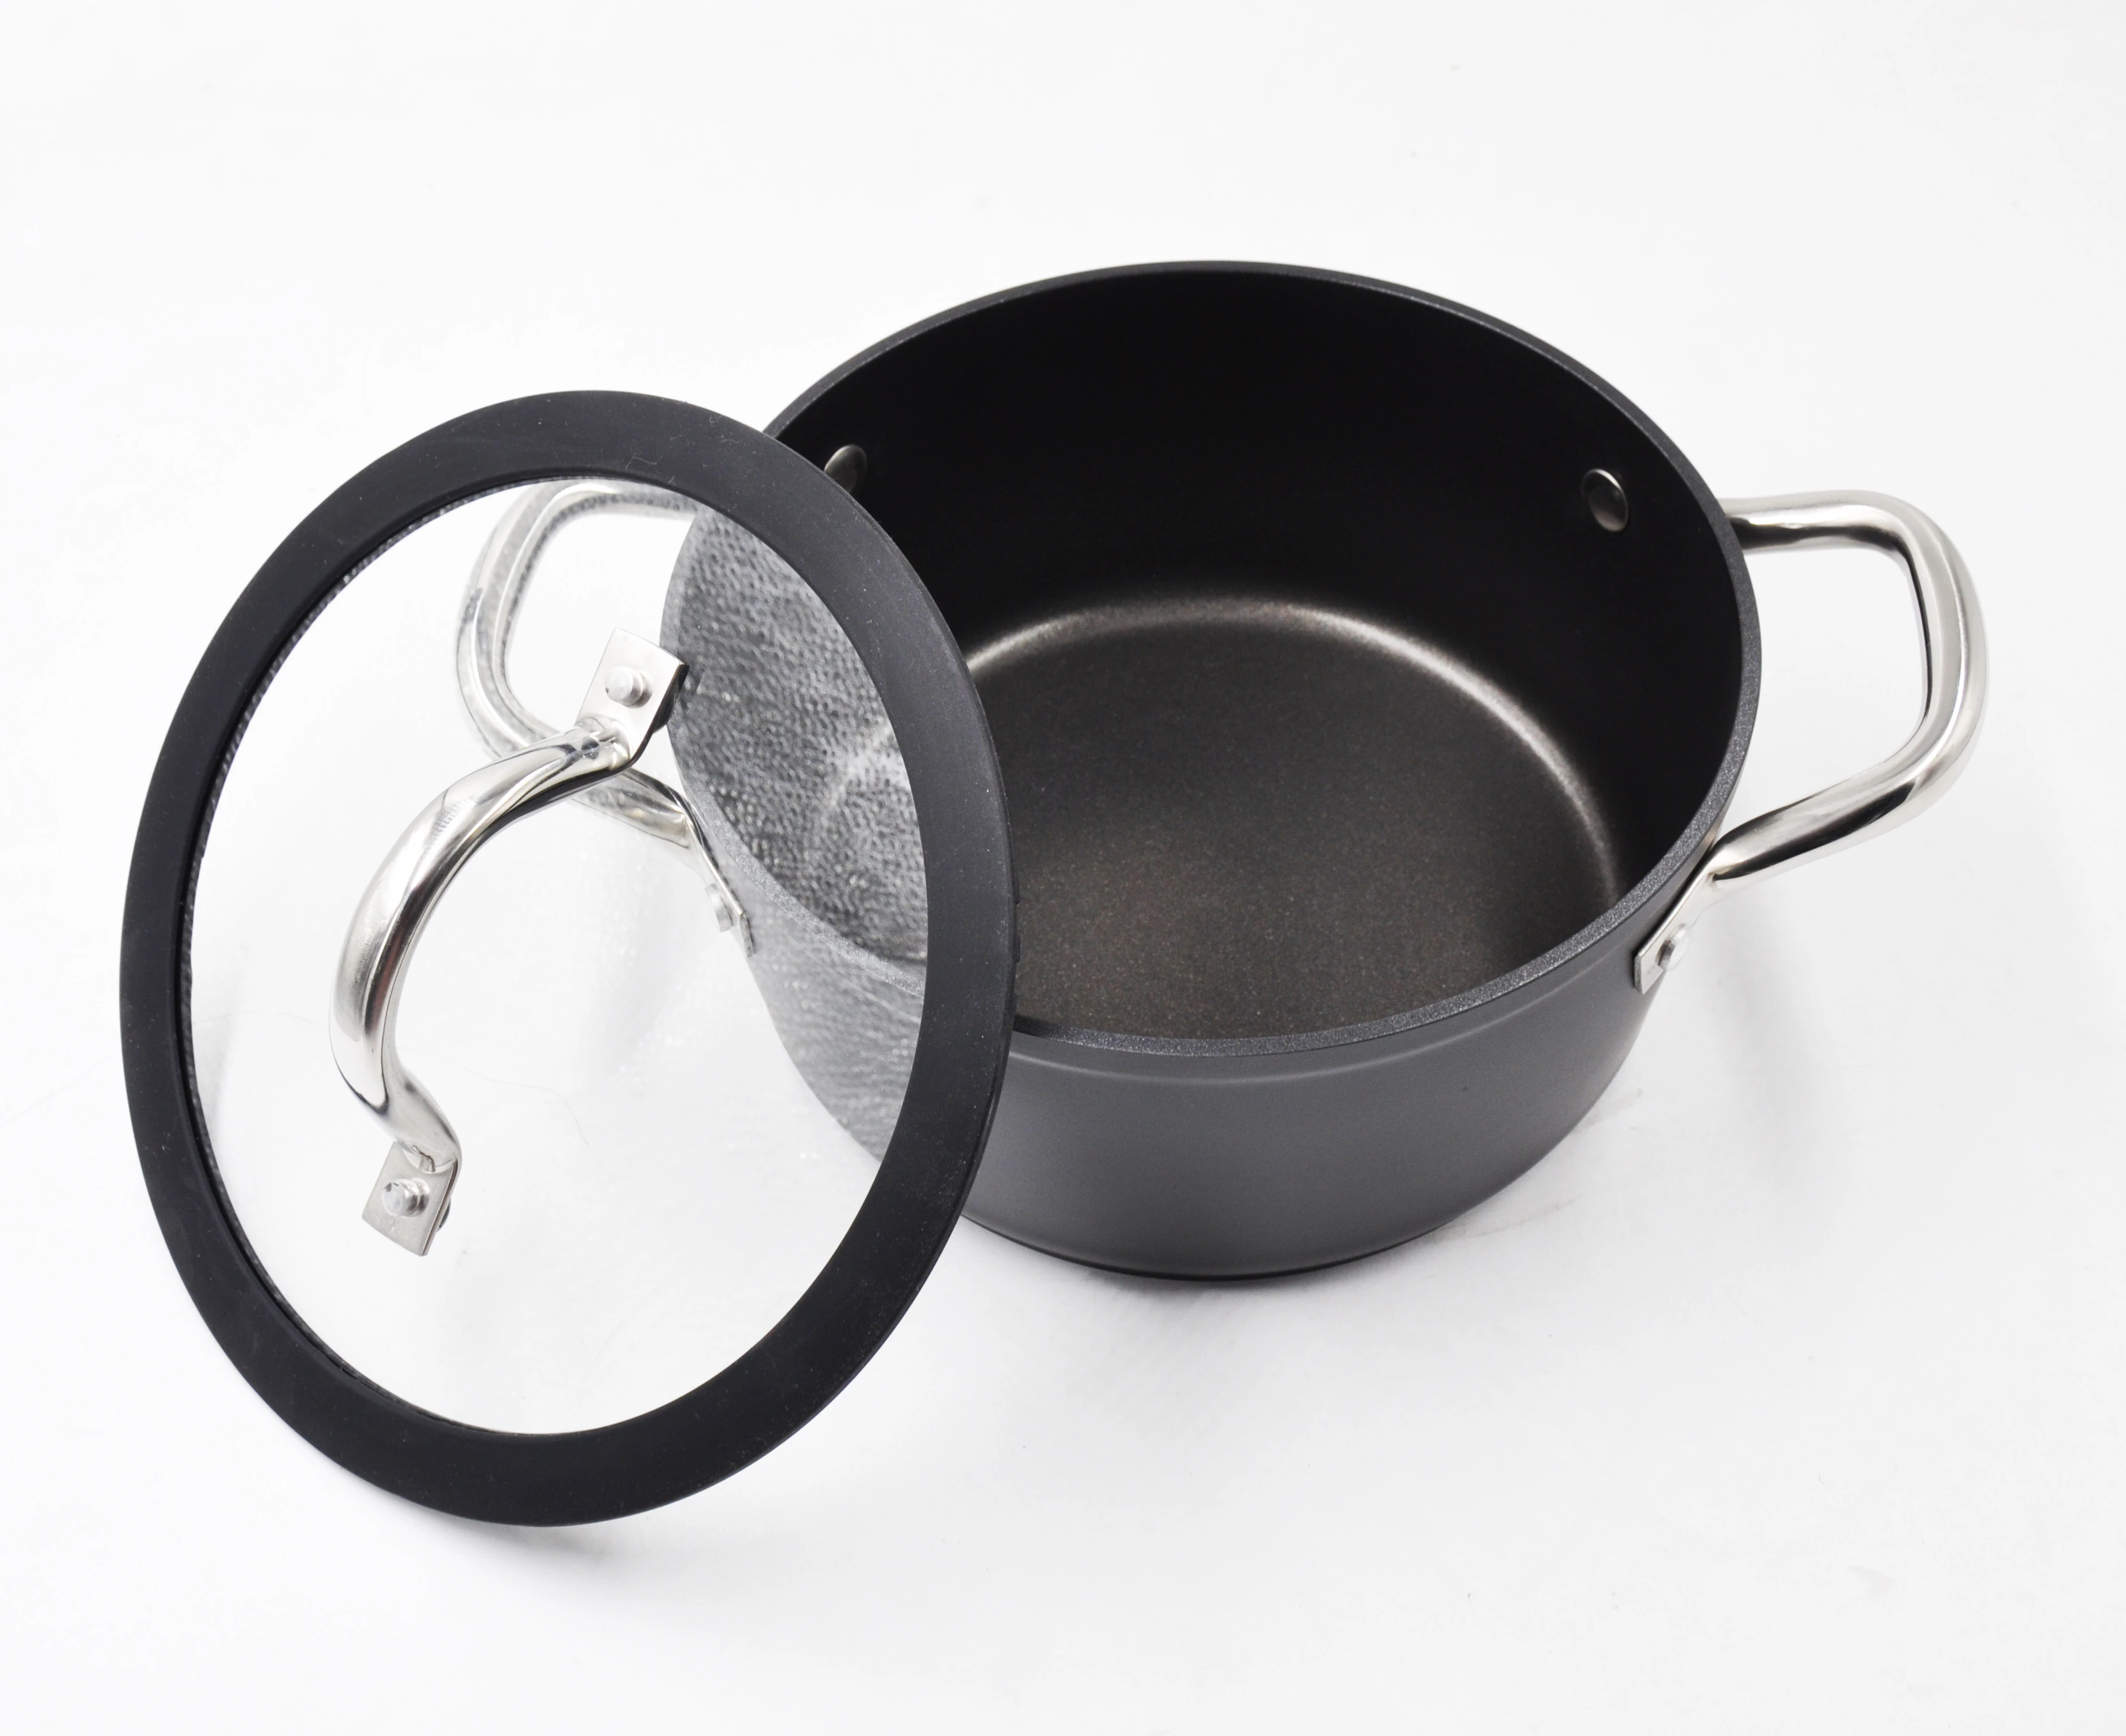 Forged aluminum sauce pot with silicone lid